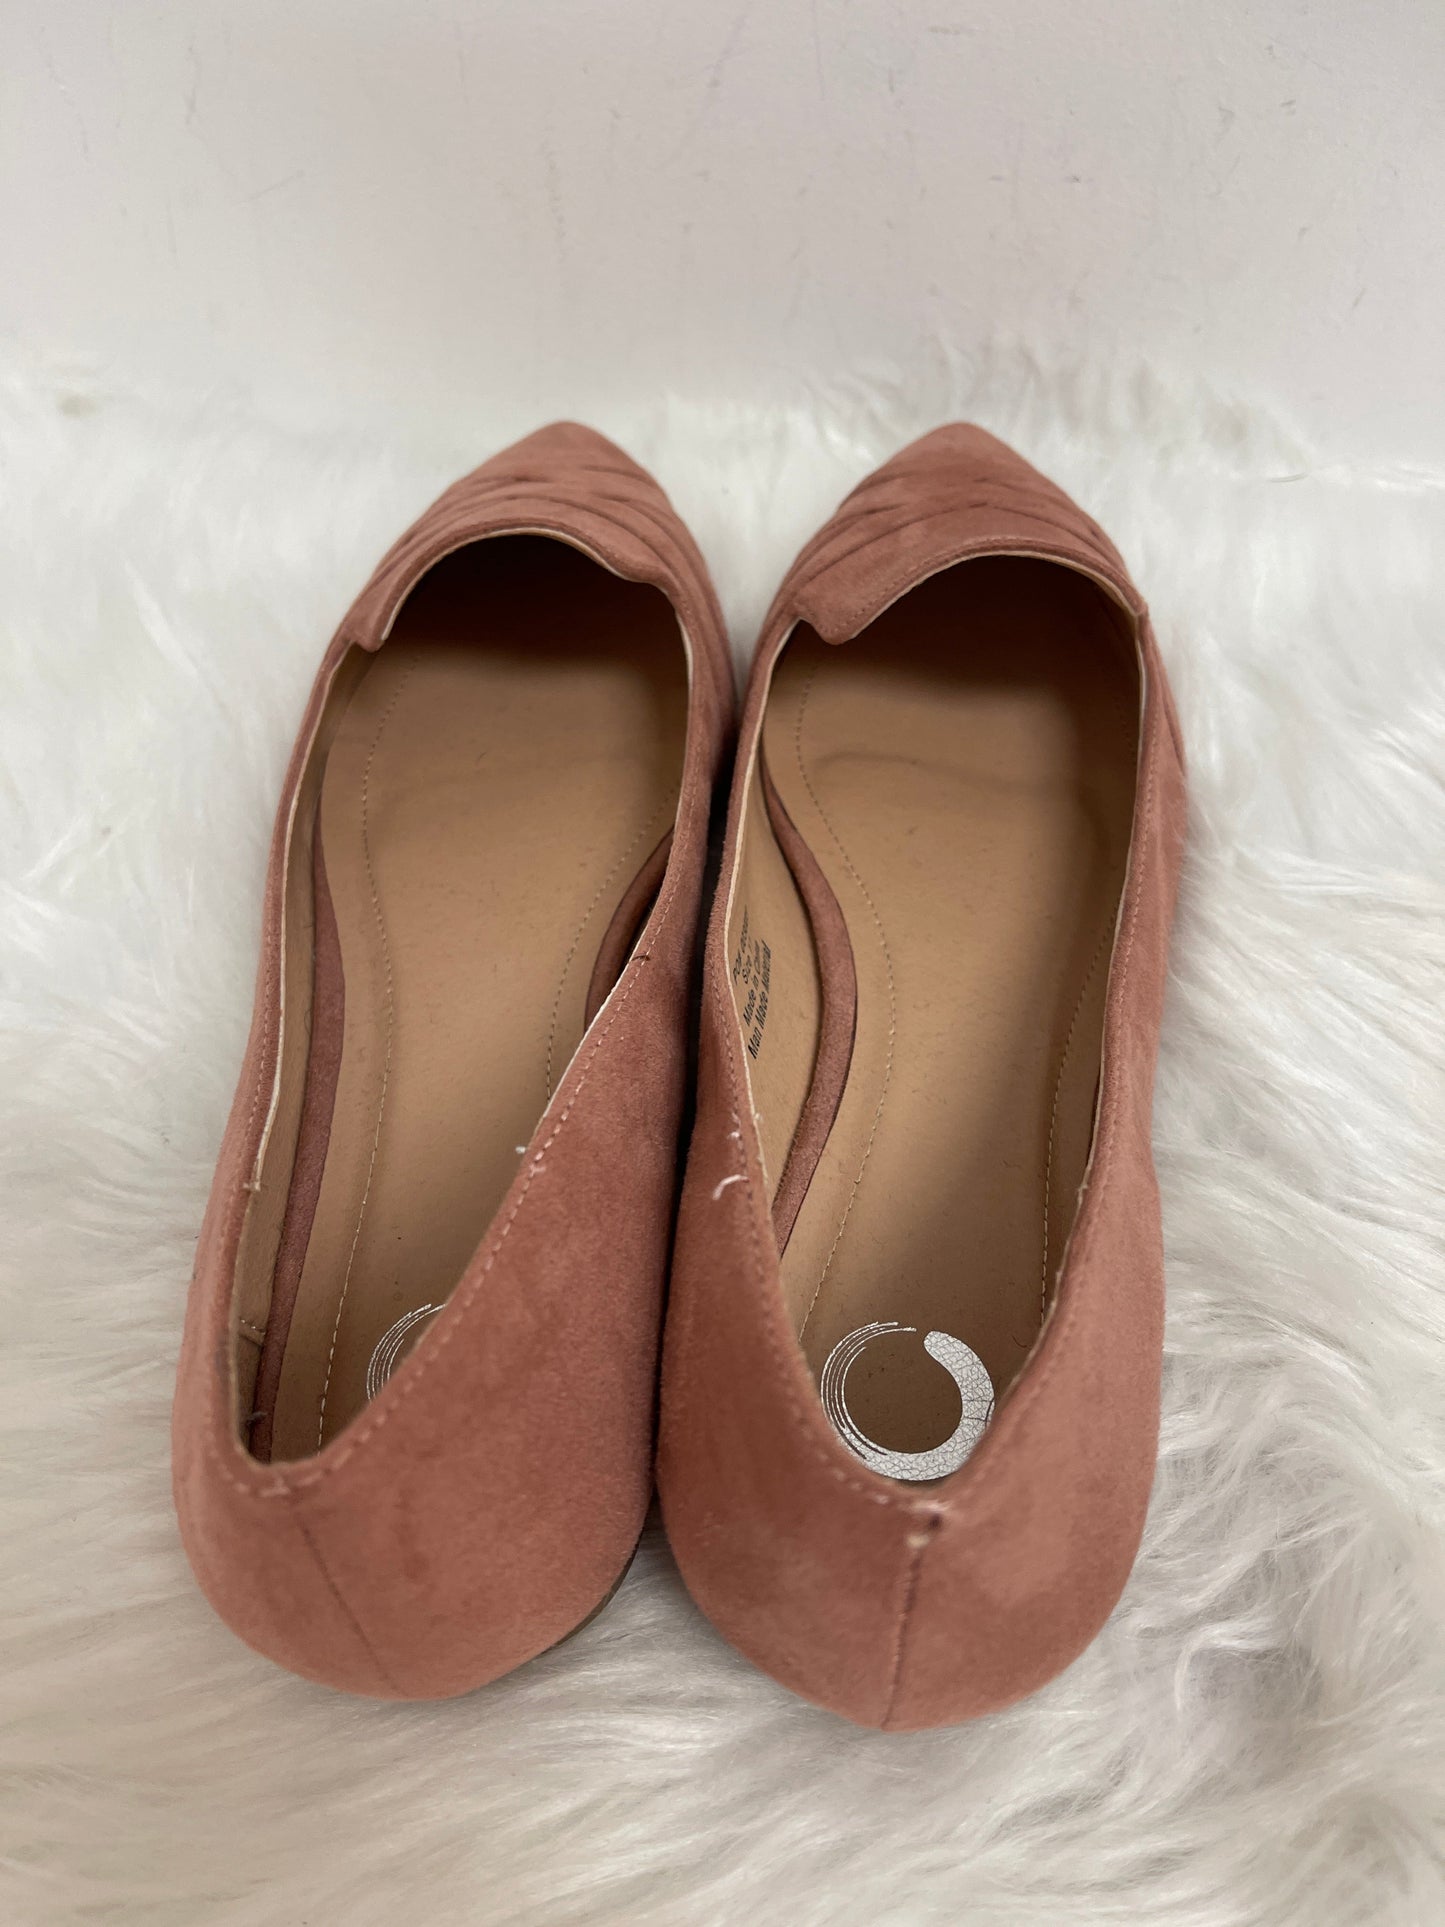 Pink Shoes Flats Clothes Mentor, Size 11